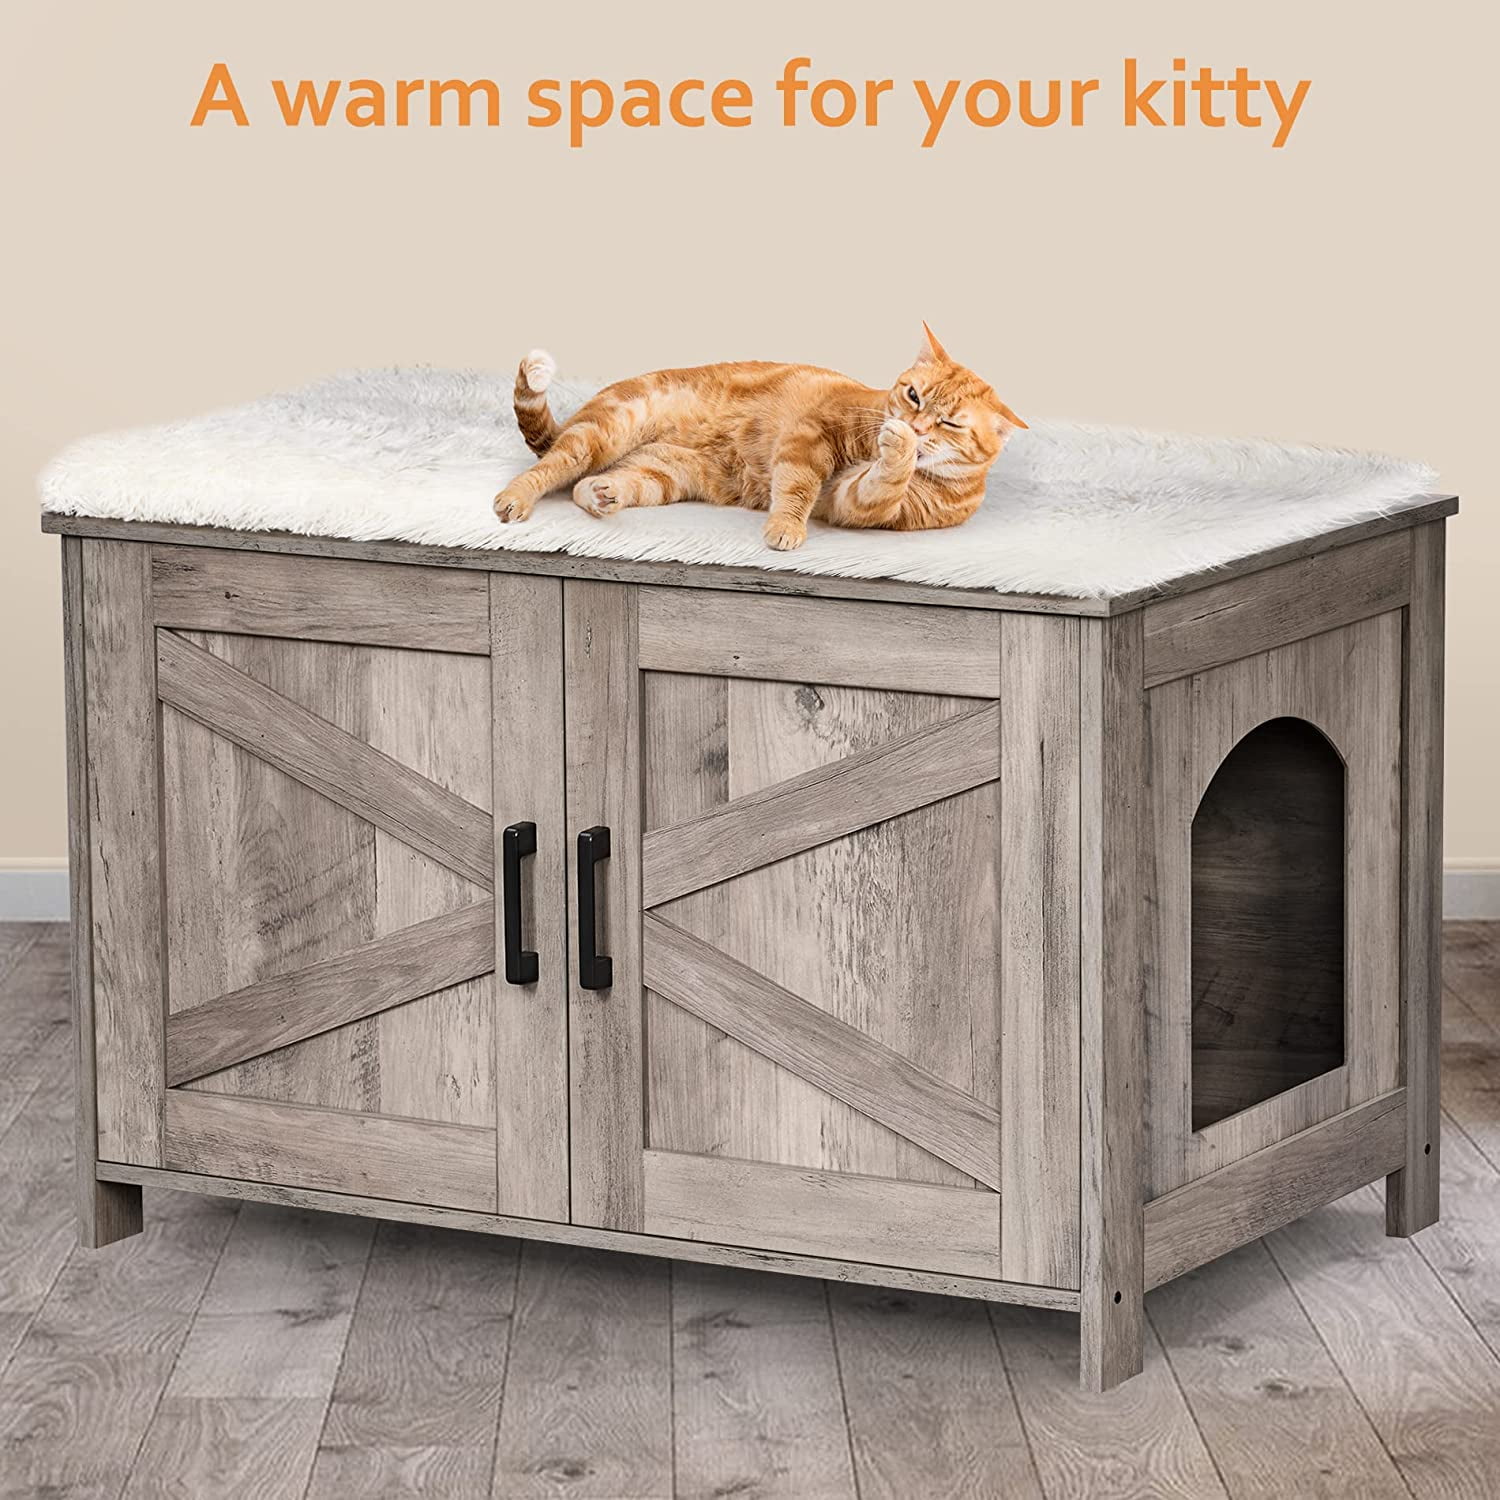 DINZI LVJ Litter Box Enclosure, Cat Litter House with Louvered Doors,  Entrance Can Be on Left or Right Side, Spacious Hidden Washroom for Most of  Box